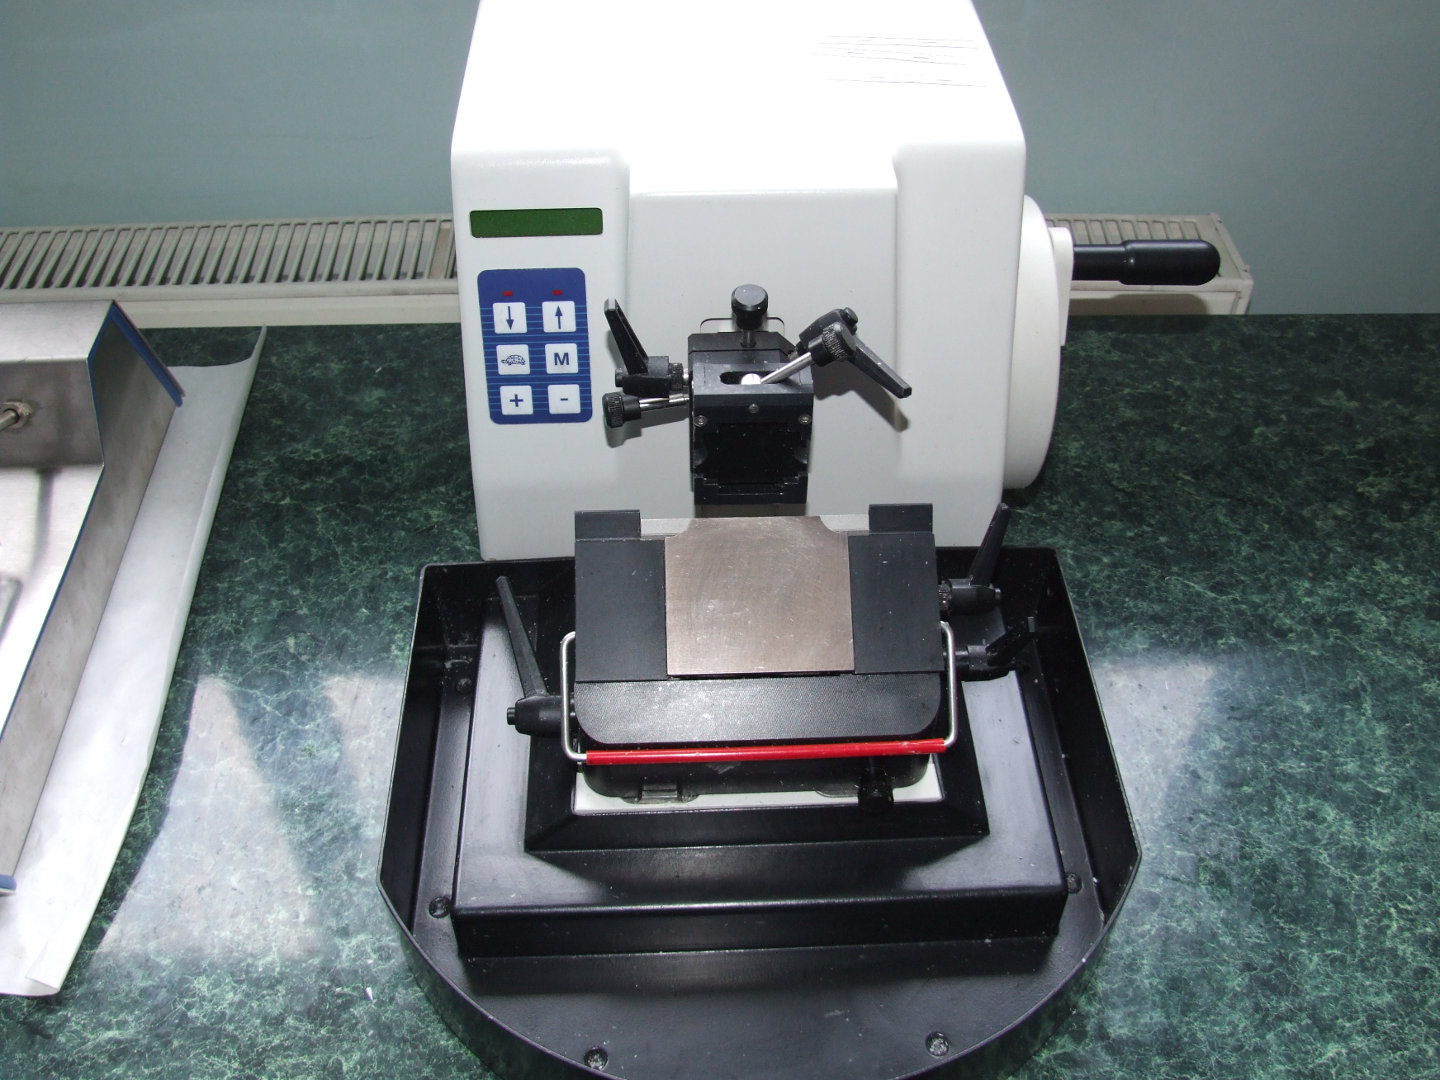 Semi-automatic microtome; Cassette holder clamp and disposable razor blade table